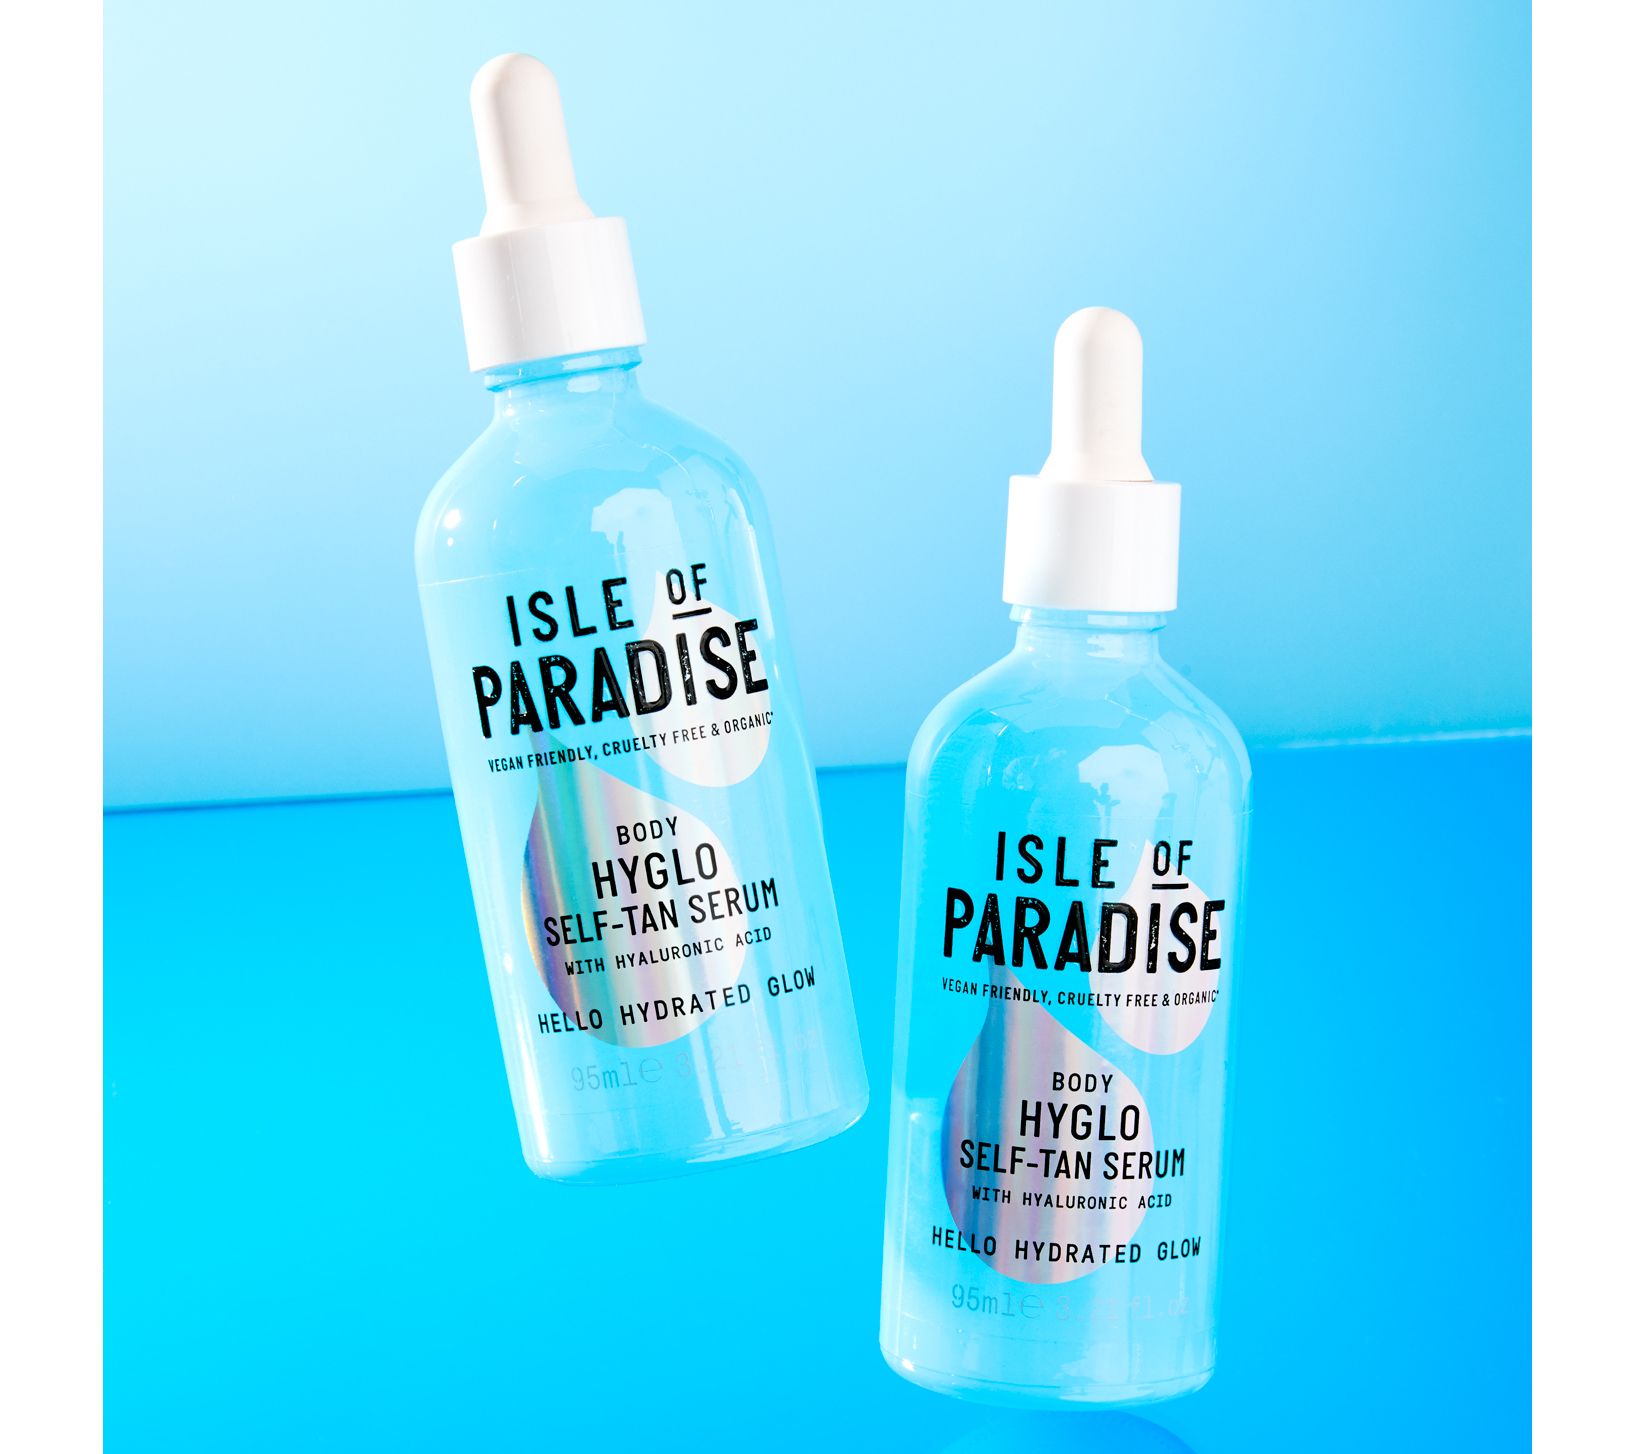 Isle of Paradise Hyglo Face & Body Serum Review